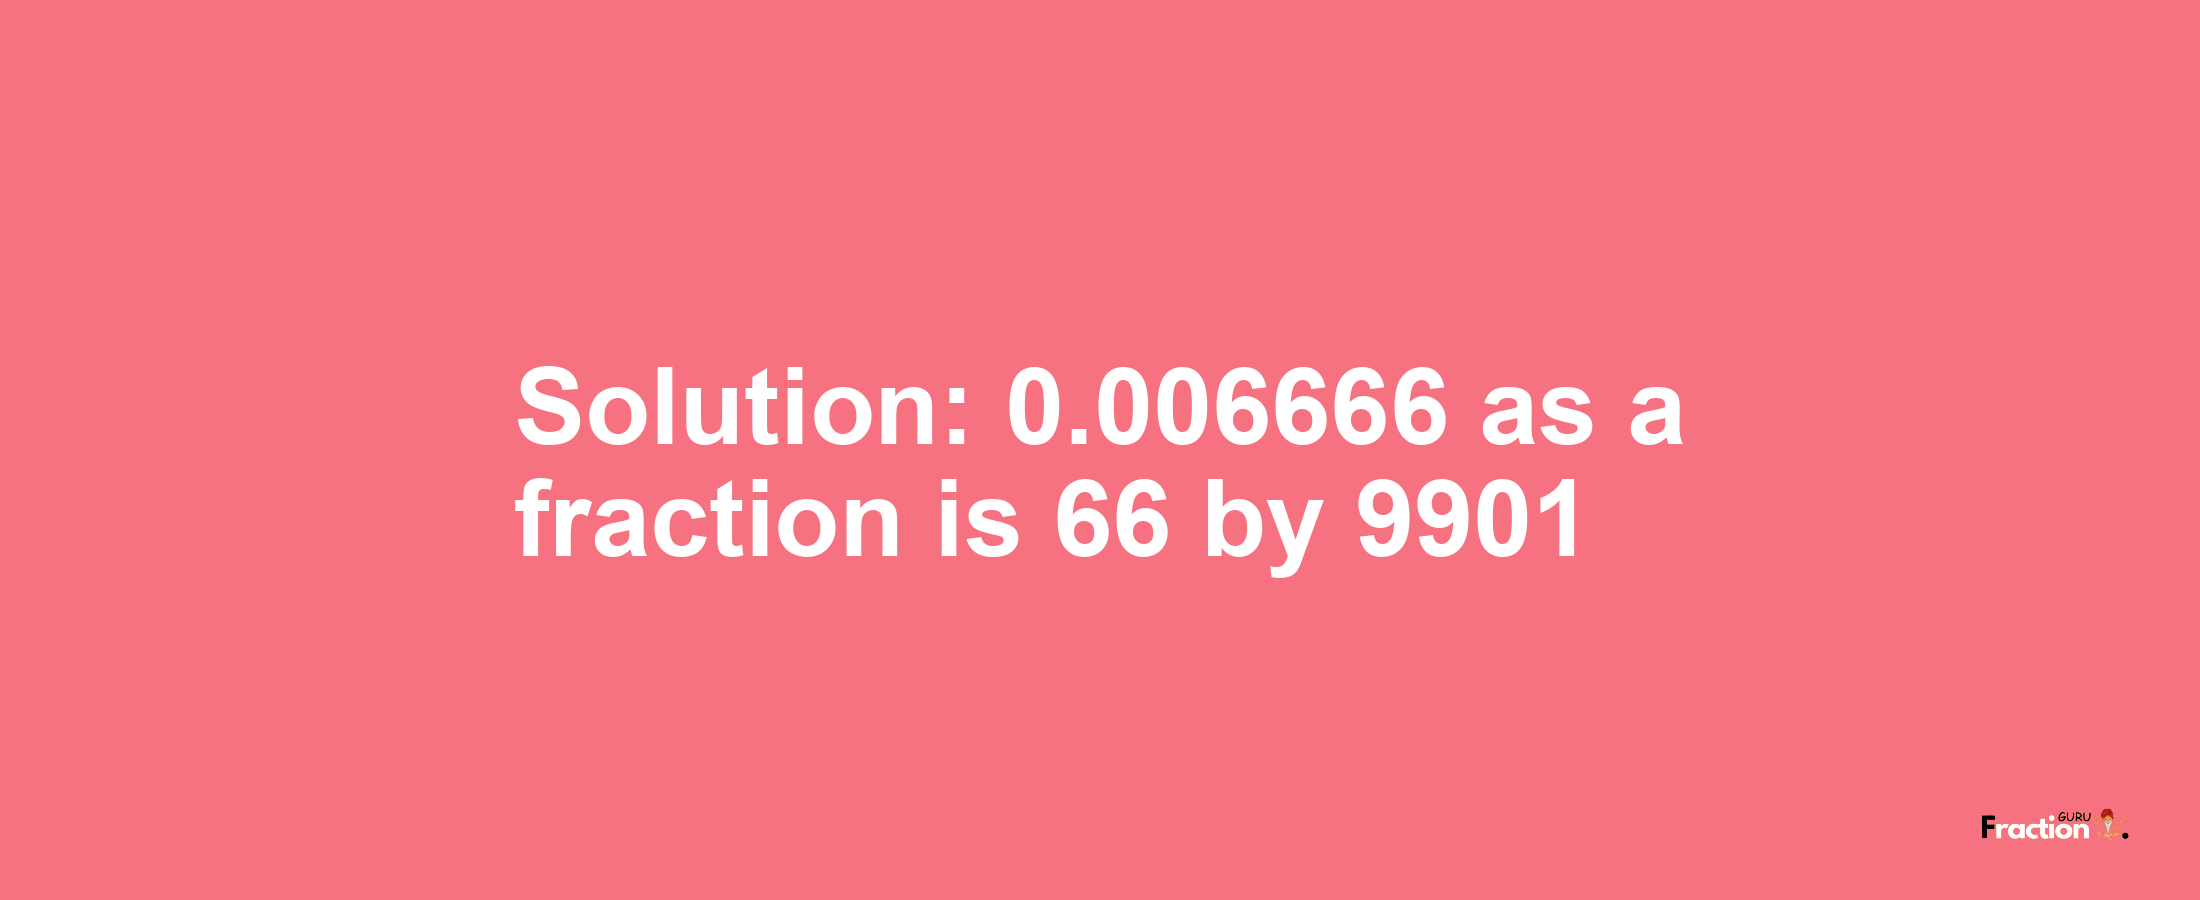 Solution:0.006666 as a fraction is 66/9901